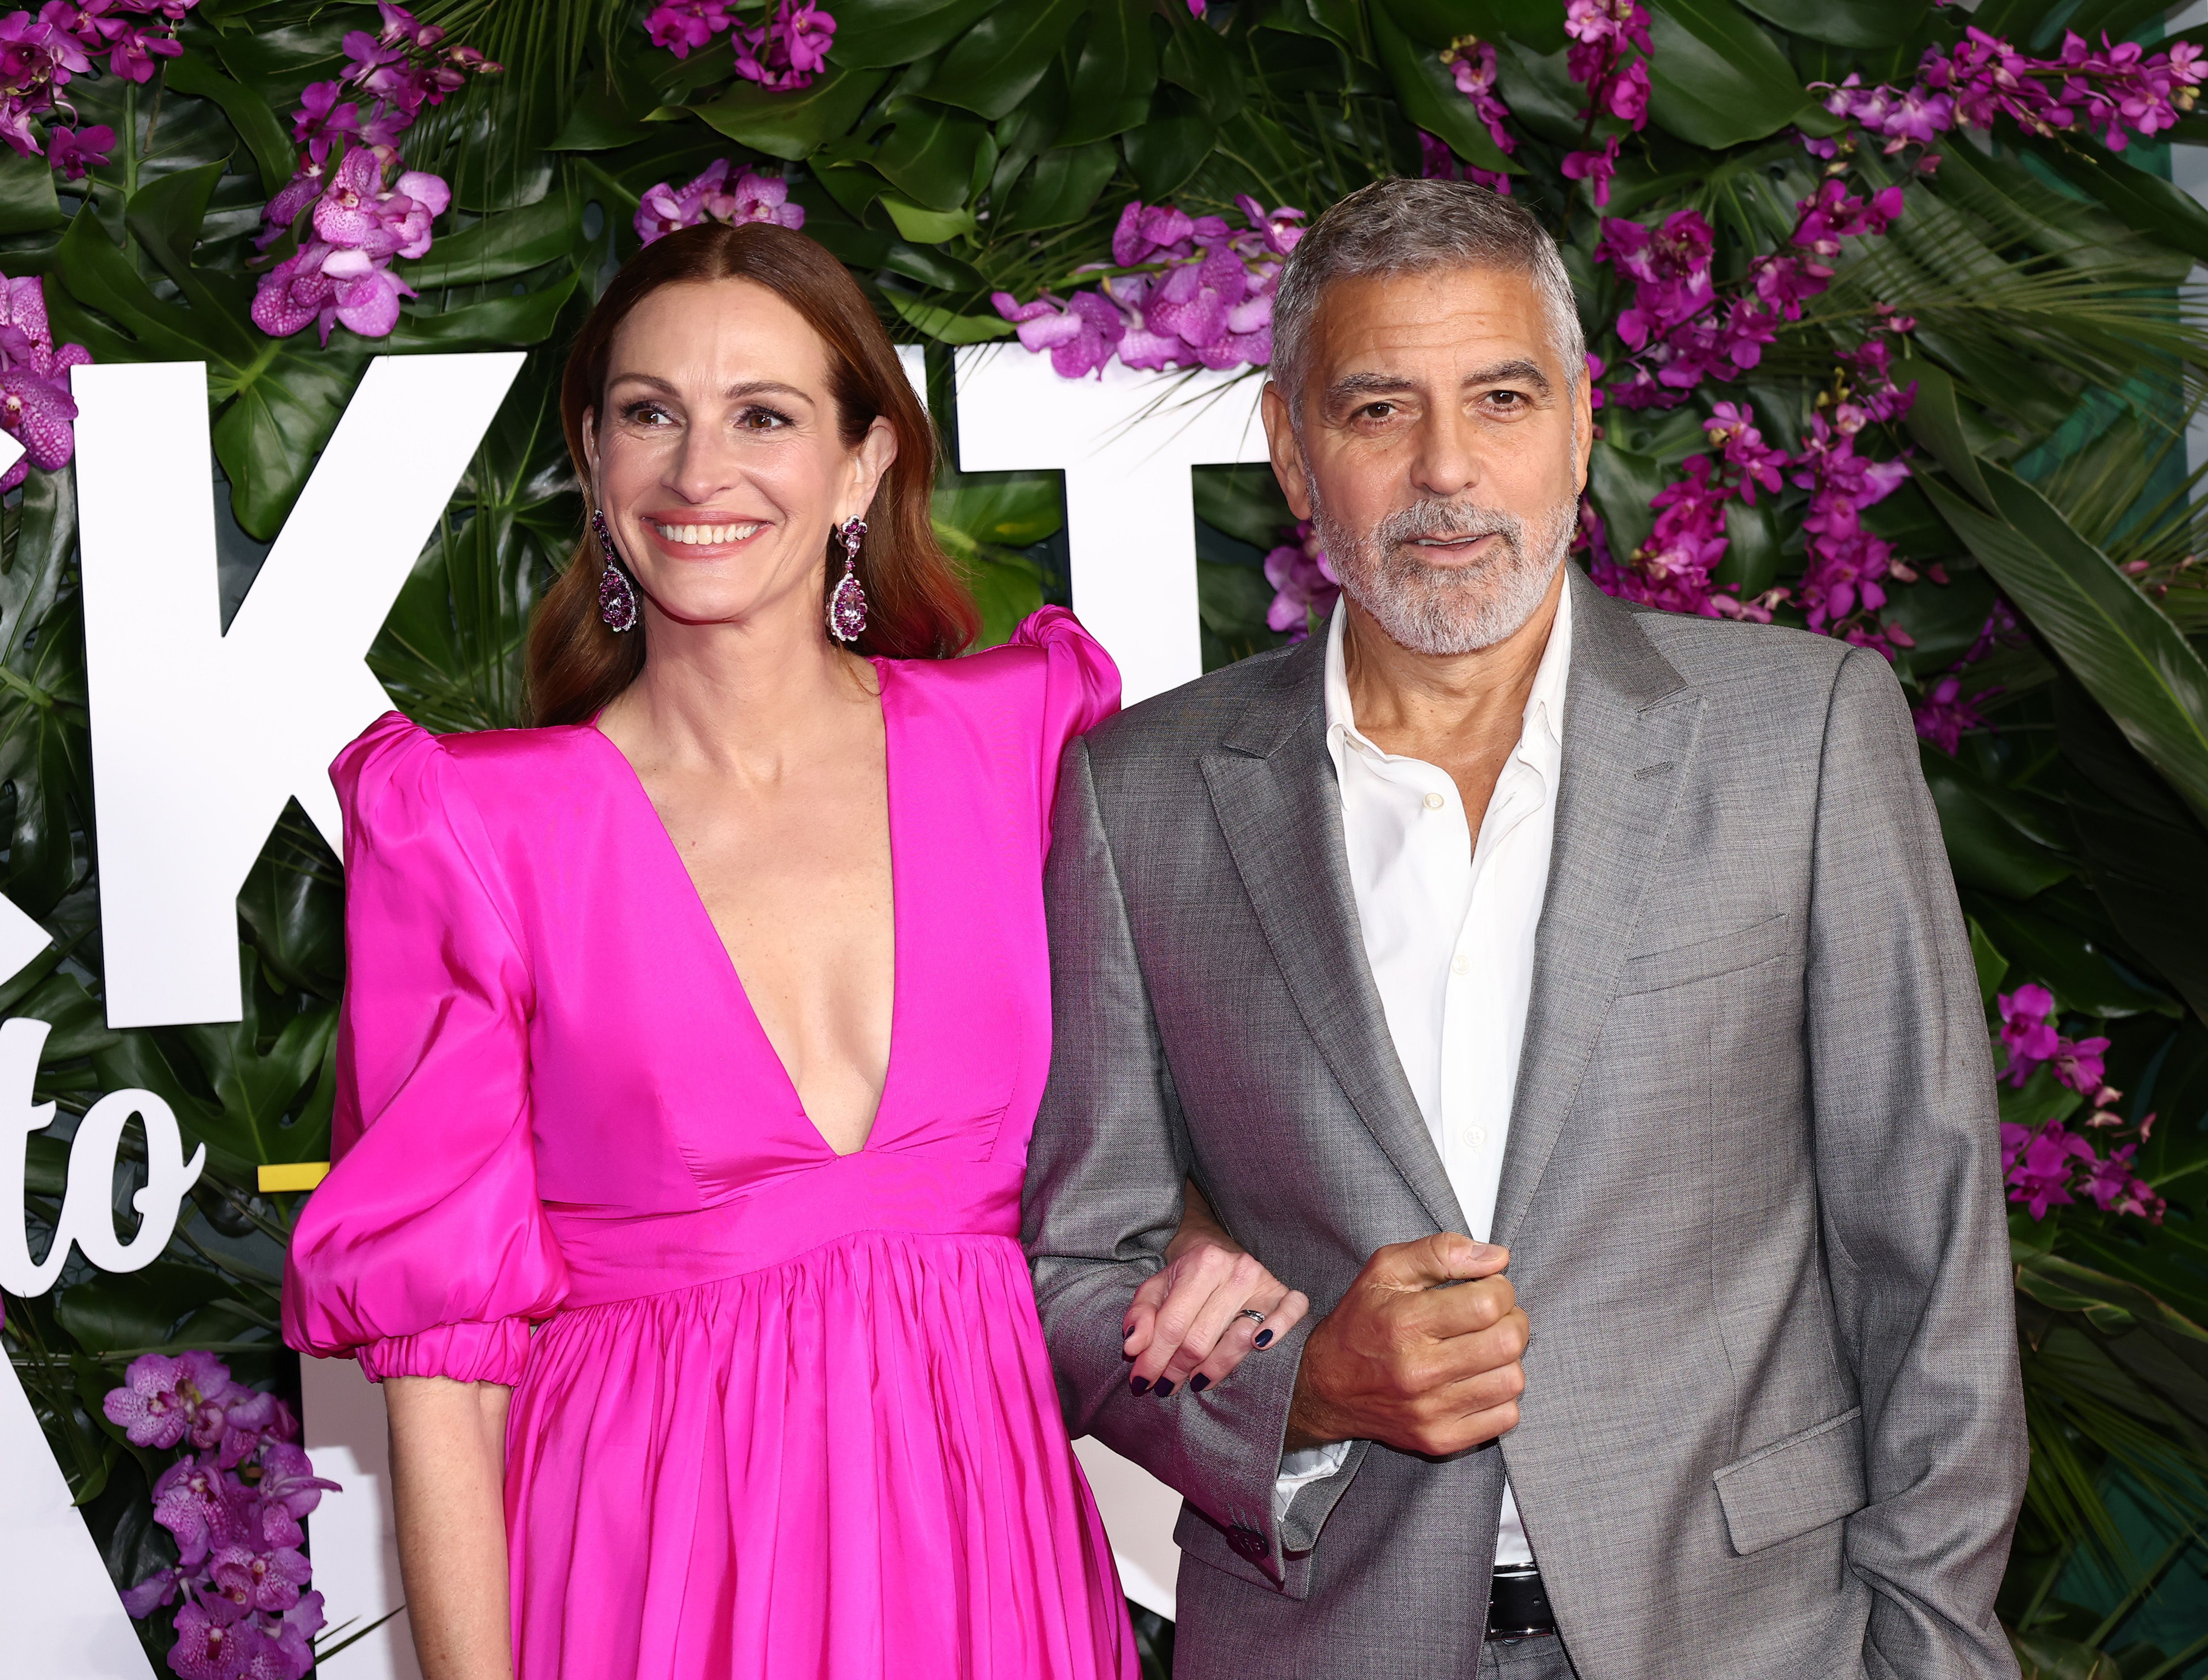 Julia Roberts and George Clooney at the premiere of "Ticket To Paradise" Los Angeles in 2022 | Source: Getty Images